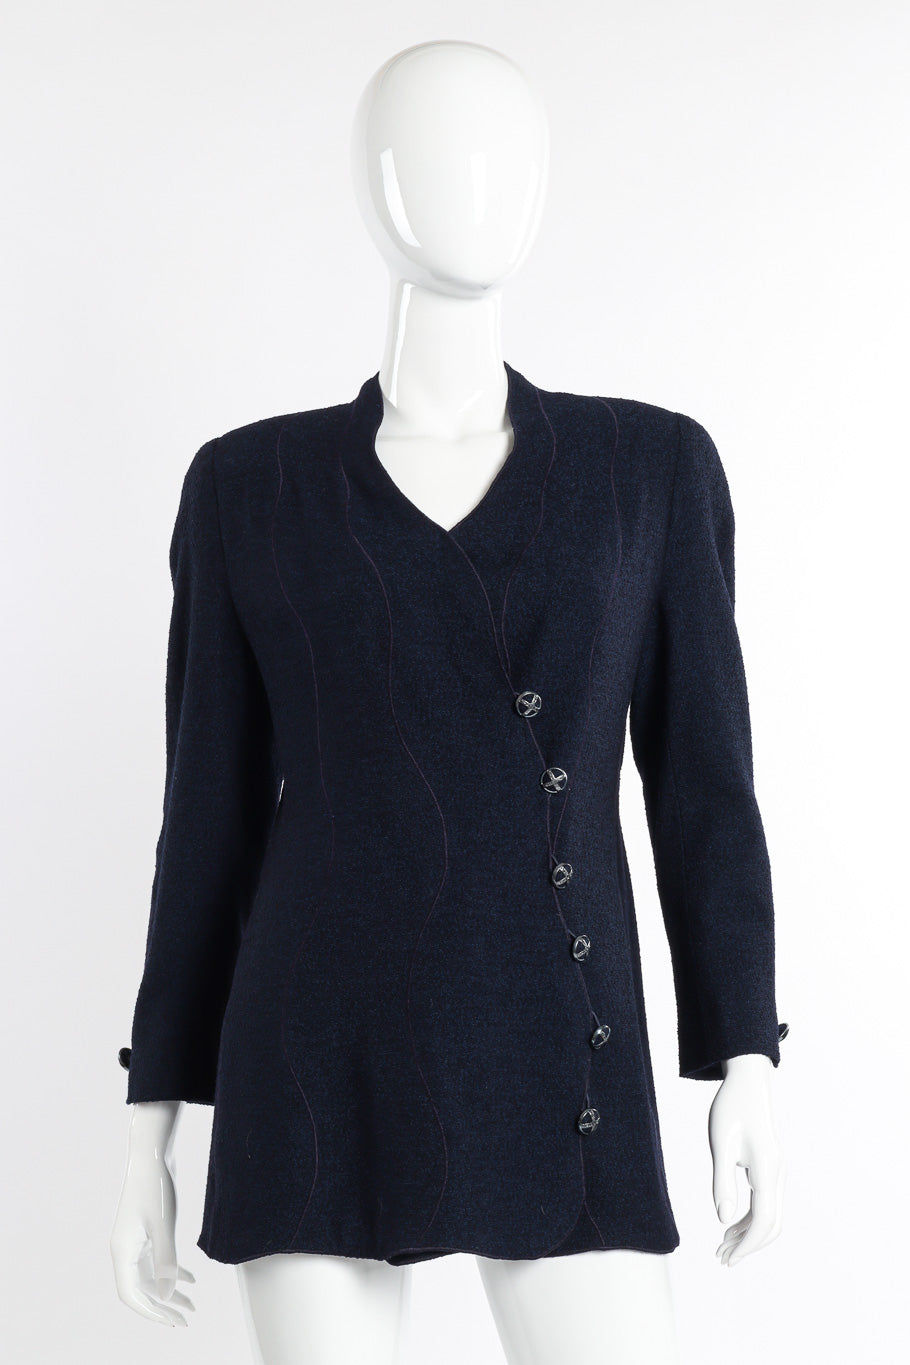 Vintage Chanel Couture Wave Wool Cardigan front view on mannequin @recessla